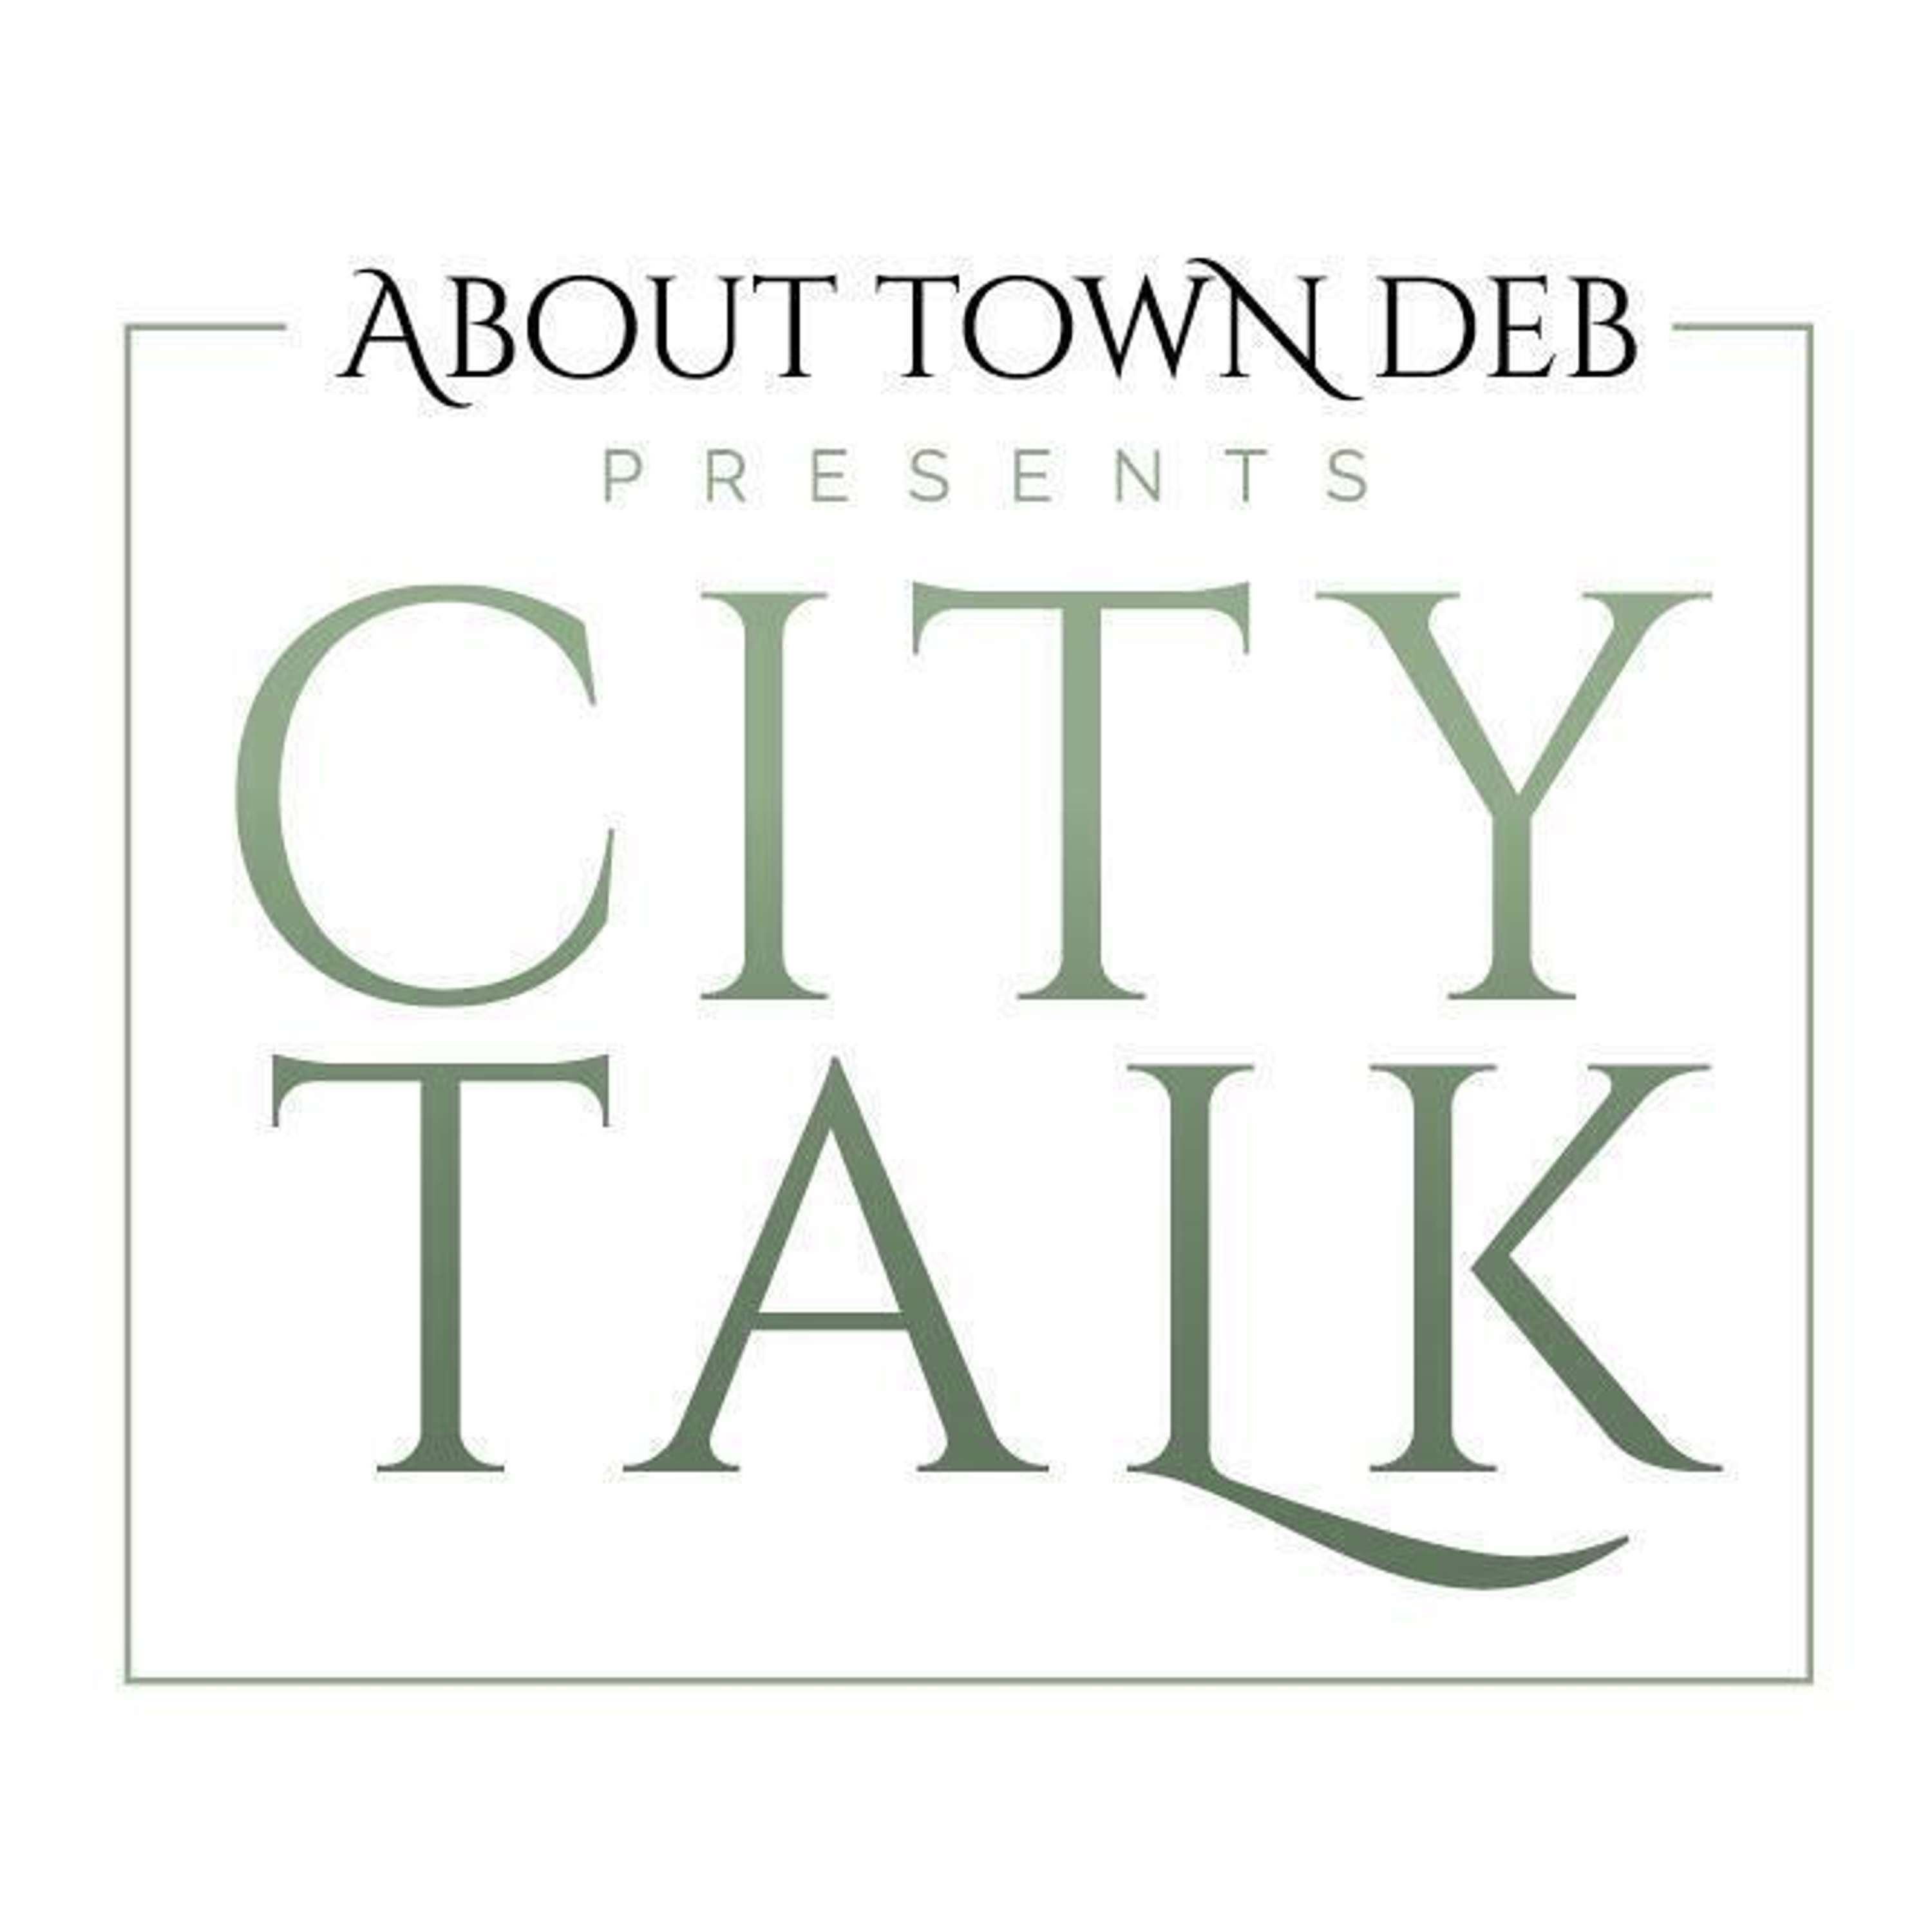 BEST OF - About Town Deb Presents City Talk: Cure For The Creepy-Crawlies with The Bed Bug Relief Foundation (05/17/23)